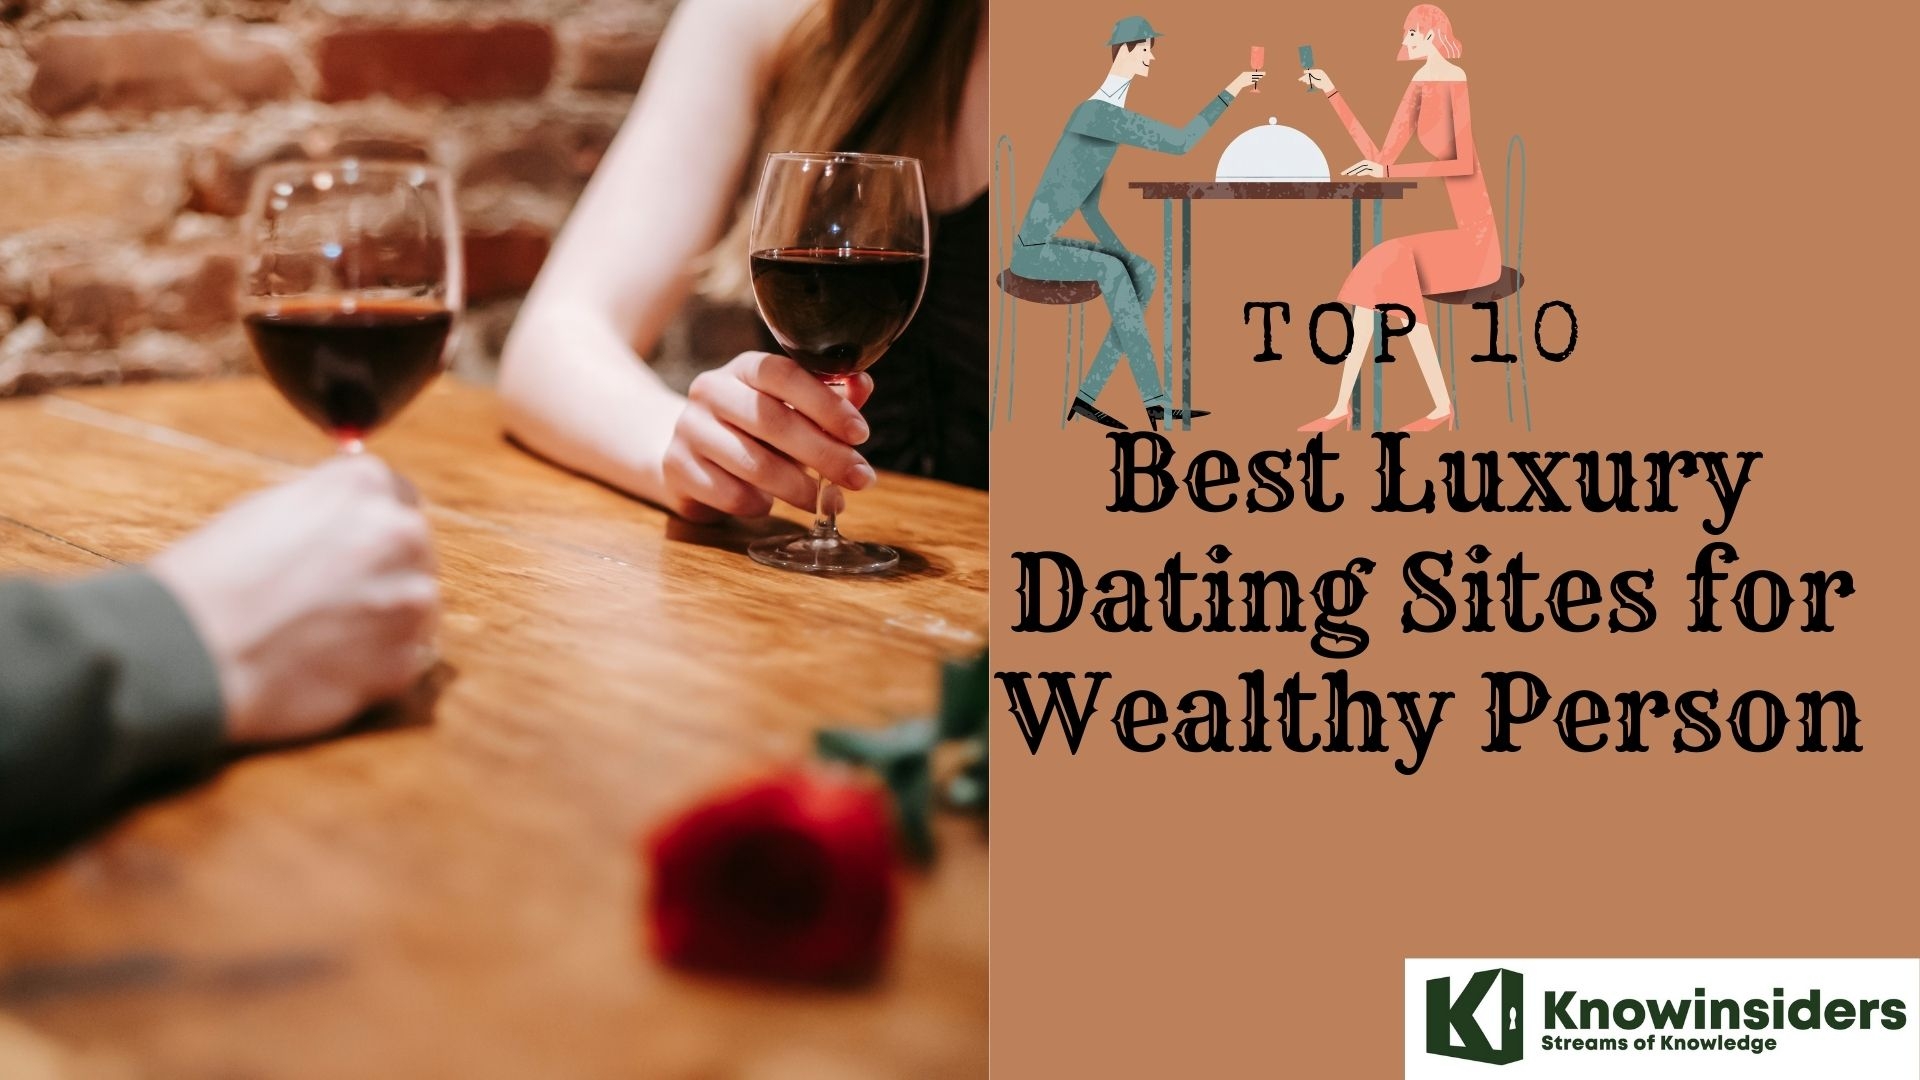 Top 10 Best Luxury Dating Sites for Wealthy Persons